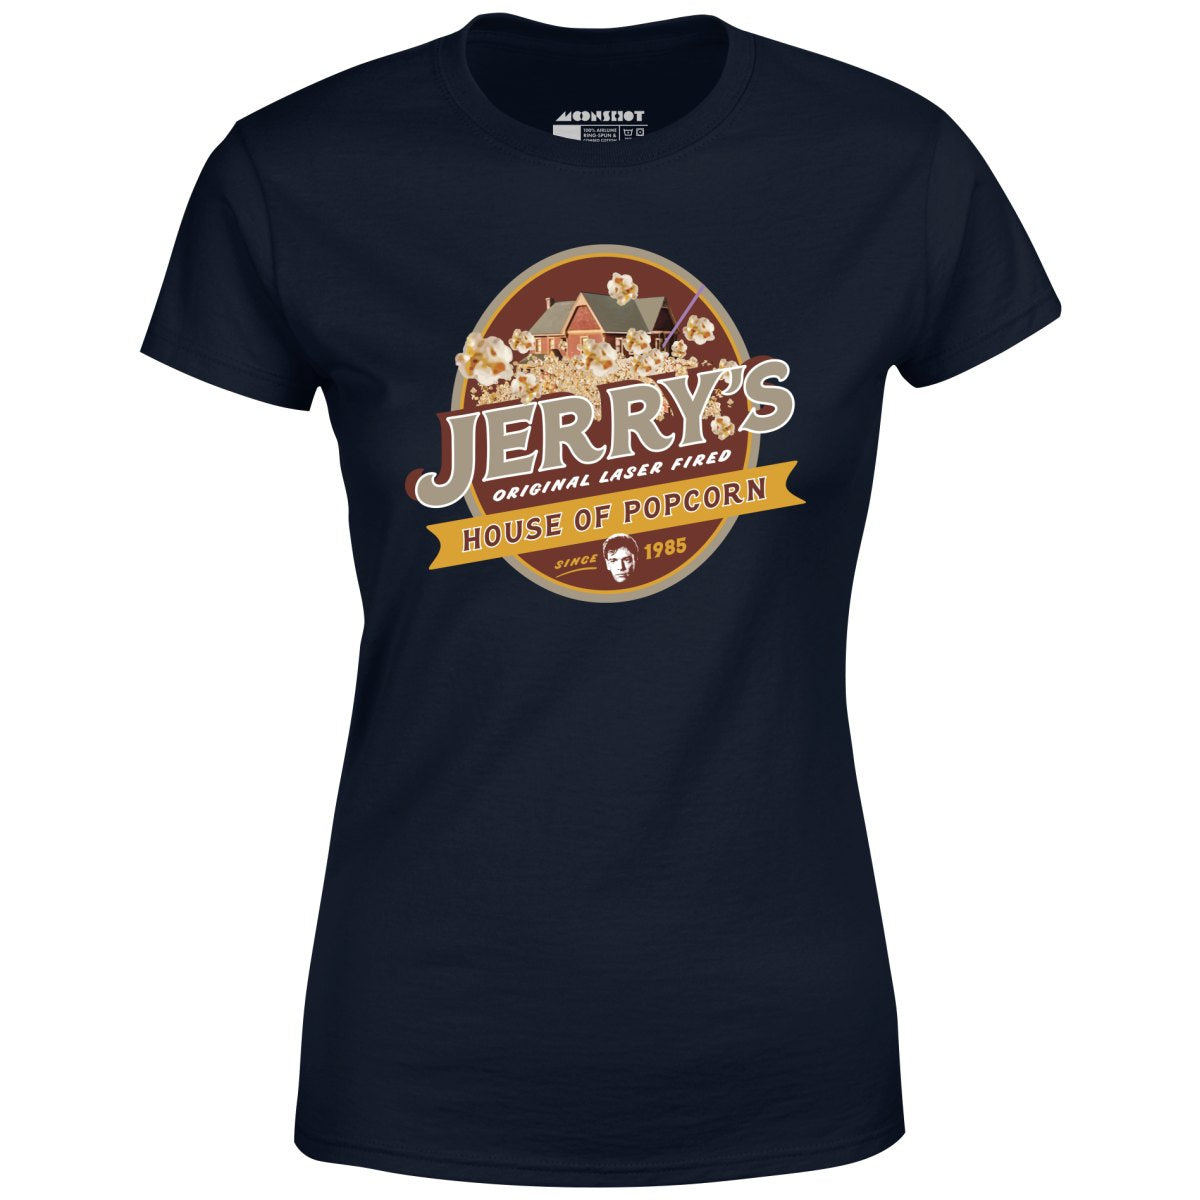 Real Genius - Jerry's House of Popcorn - Women's T-Shirt